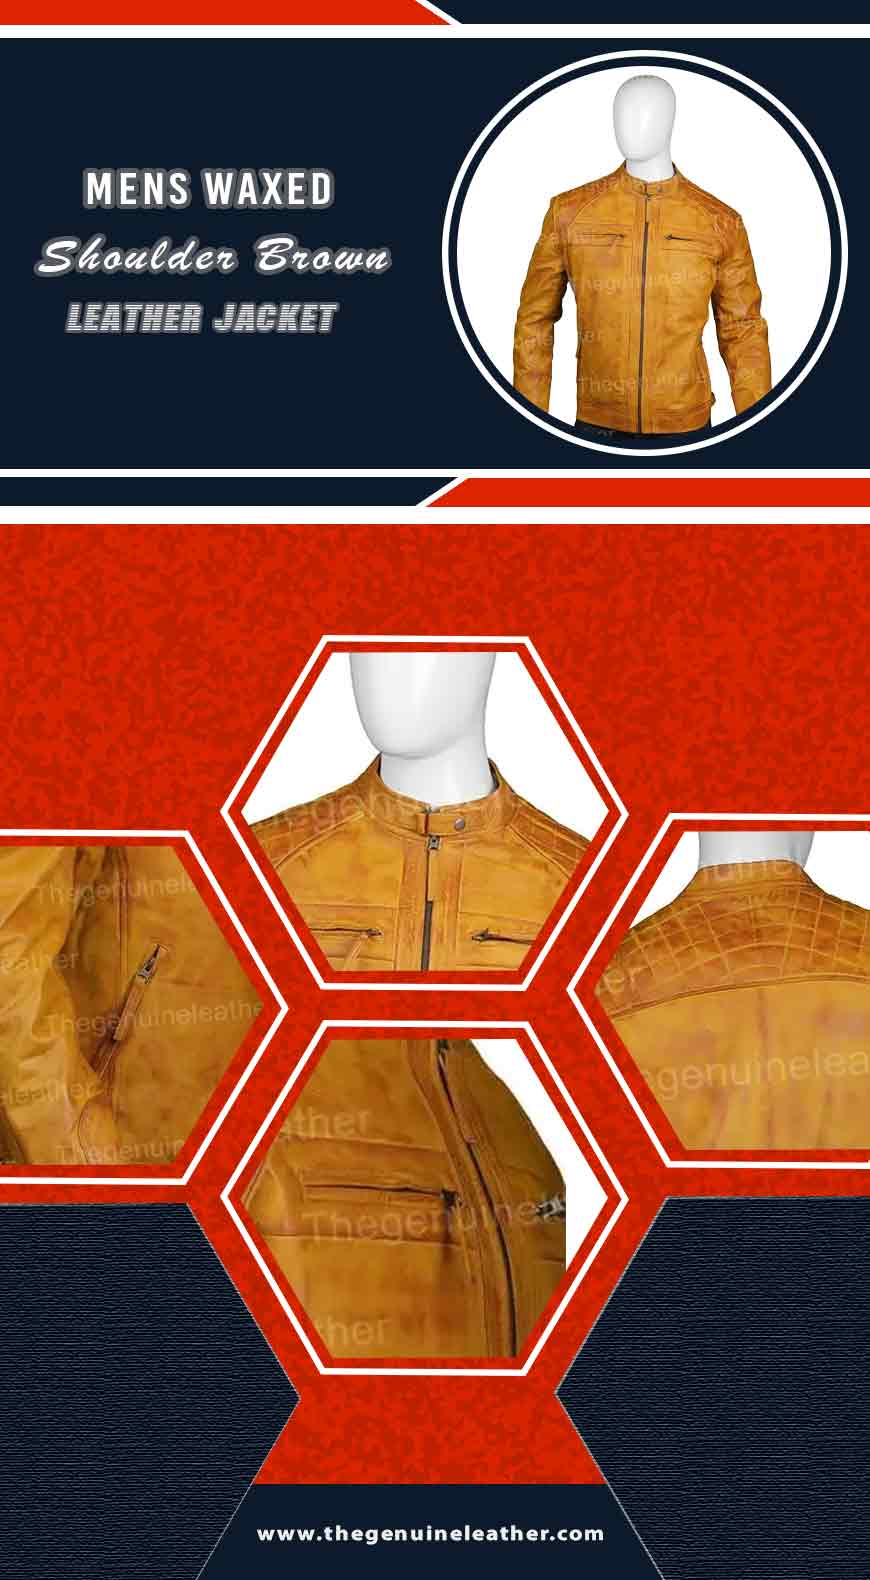 Mens Waxed Shoulder Brown Leather Jacket info